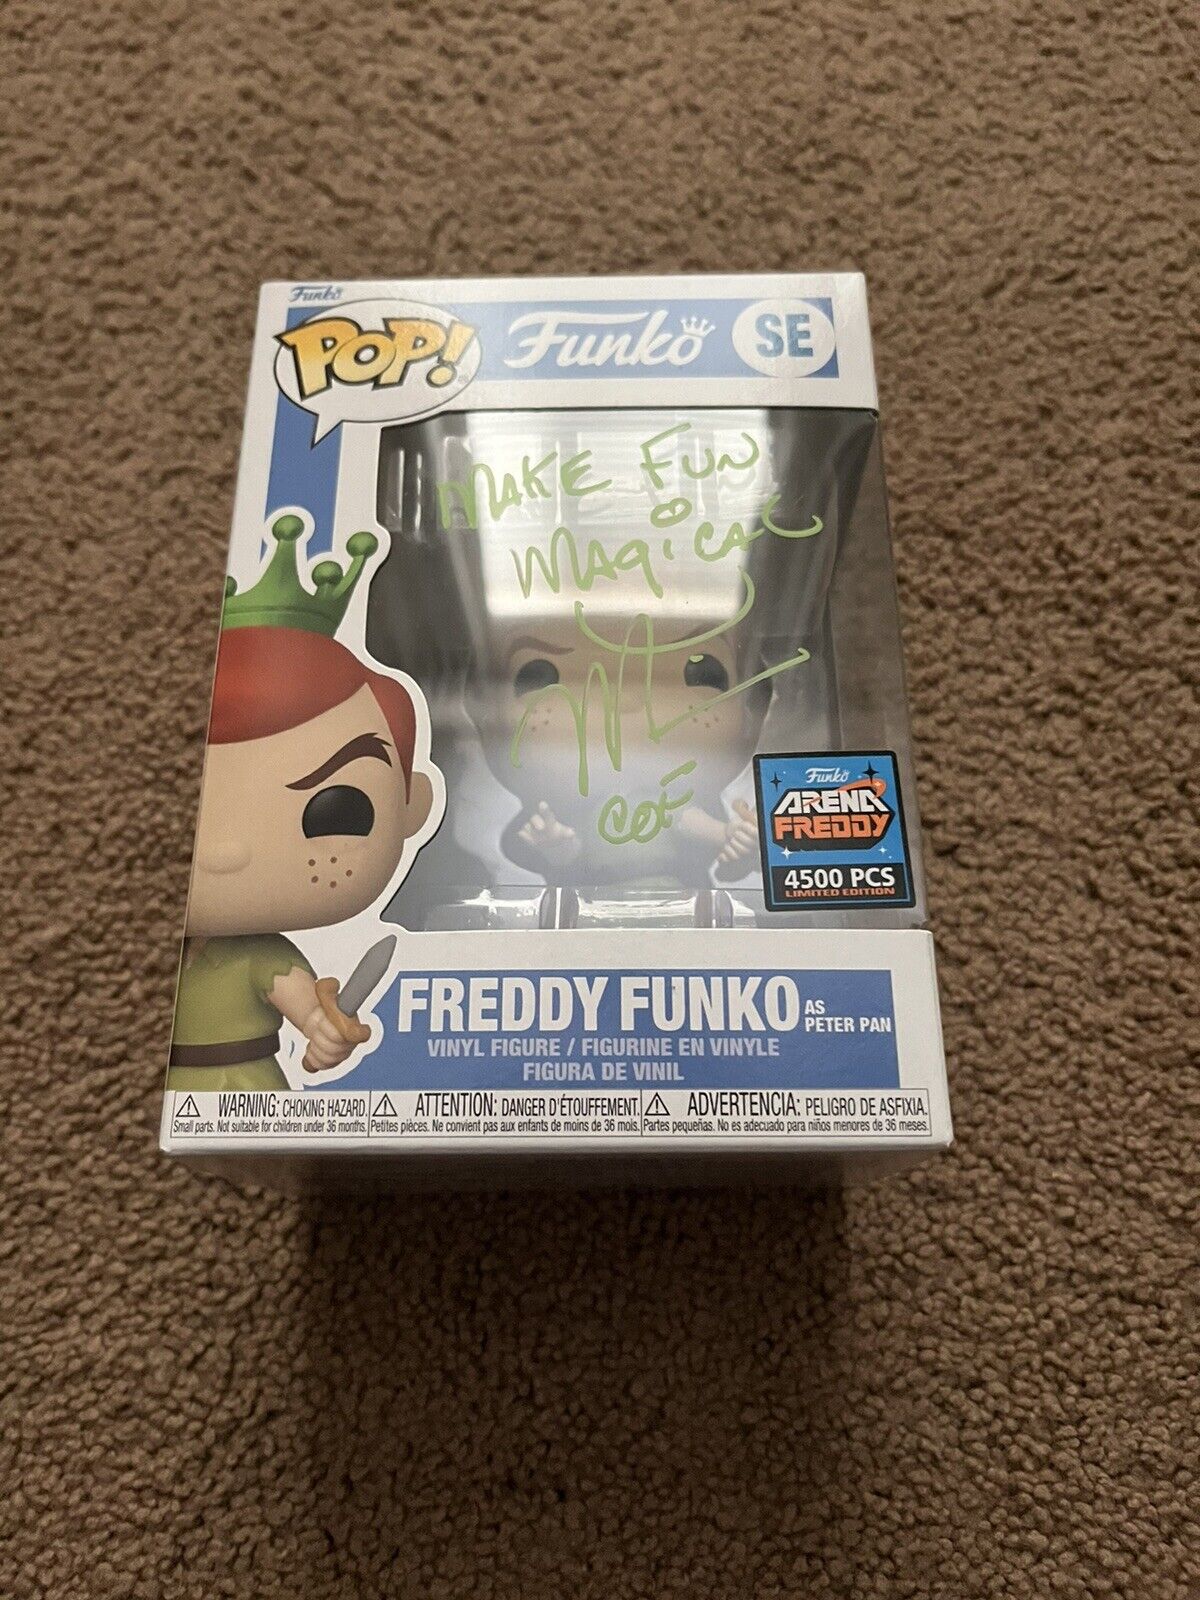 Funko POP Freddy Funko As Peter Pan (Arena Freddy 4500 PCS)(Signed/Mike Becker)